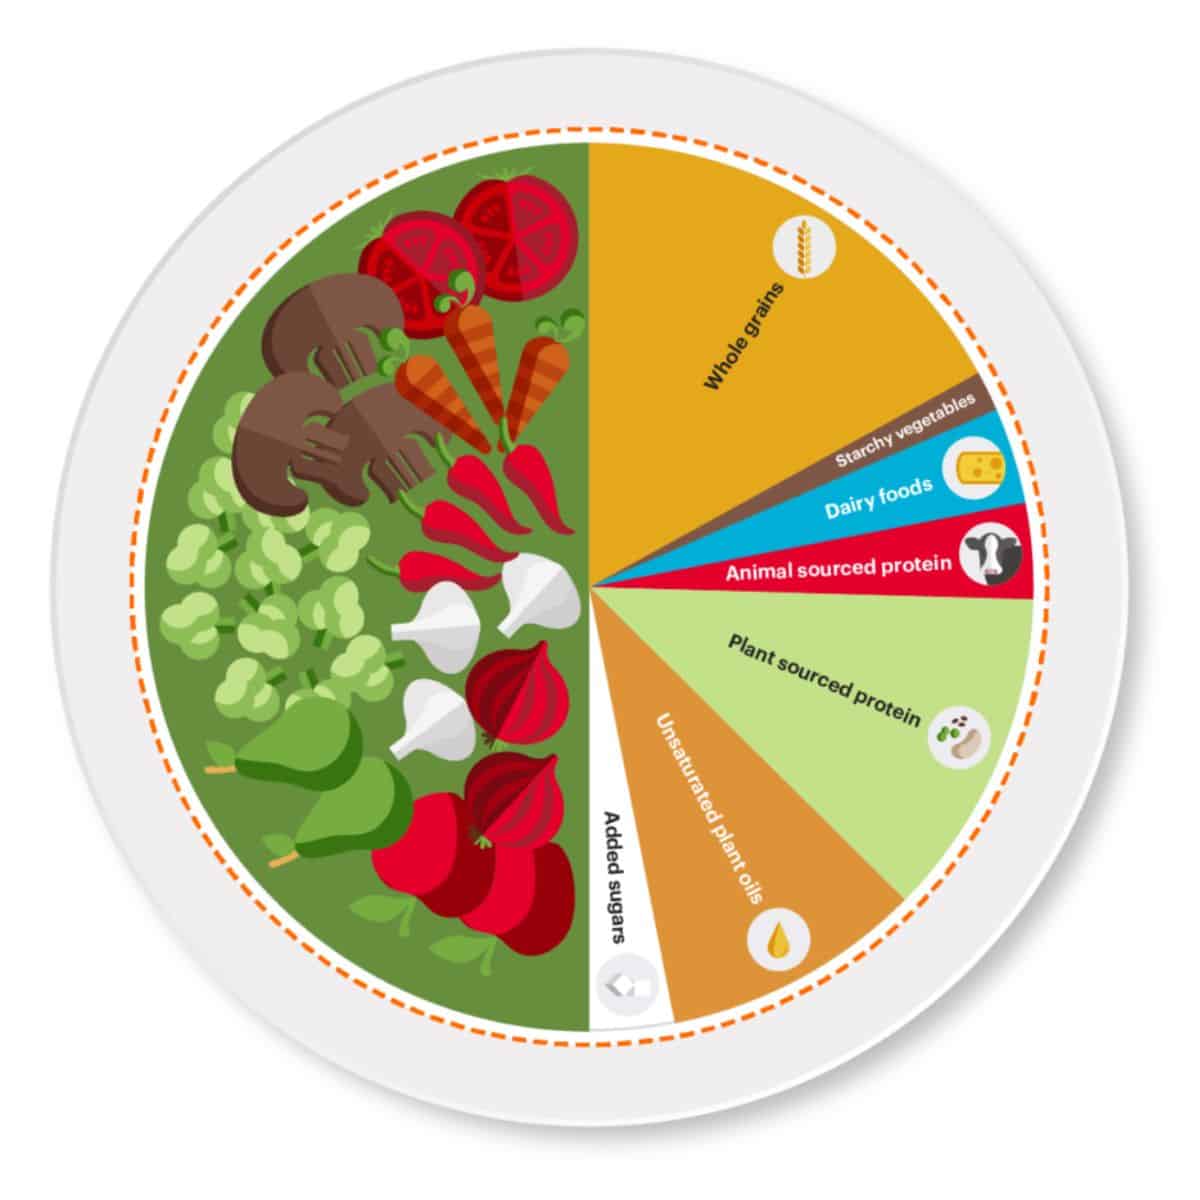 official EAT Lancet plate for planetary and dietary health showing typical make up of food groups in daily diet